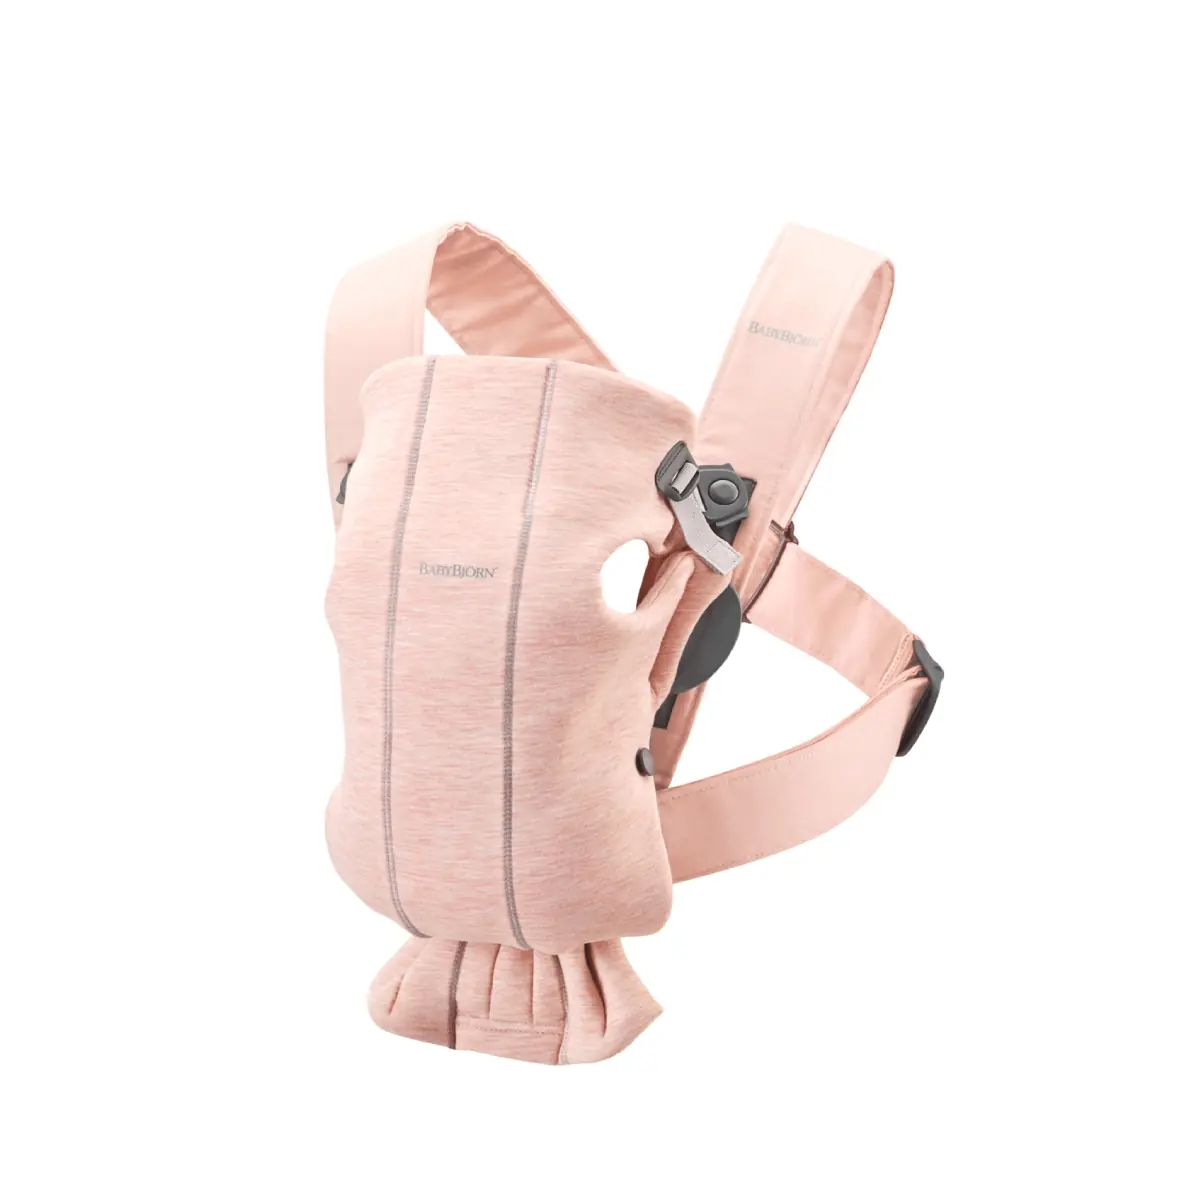 Image of BABYBJÖRN Mini Baby 3D Jersey Carrier - Light Pink